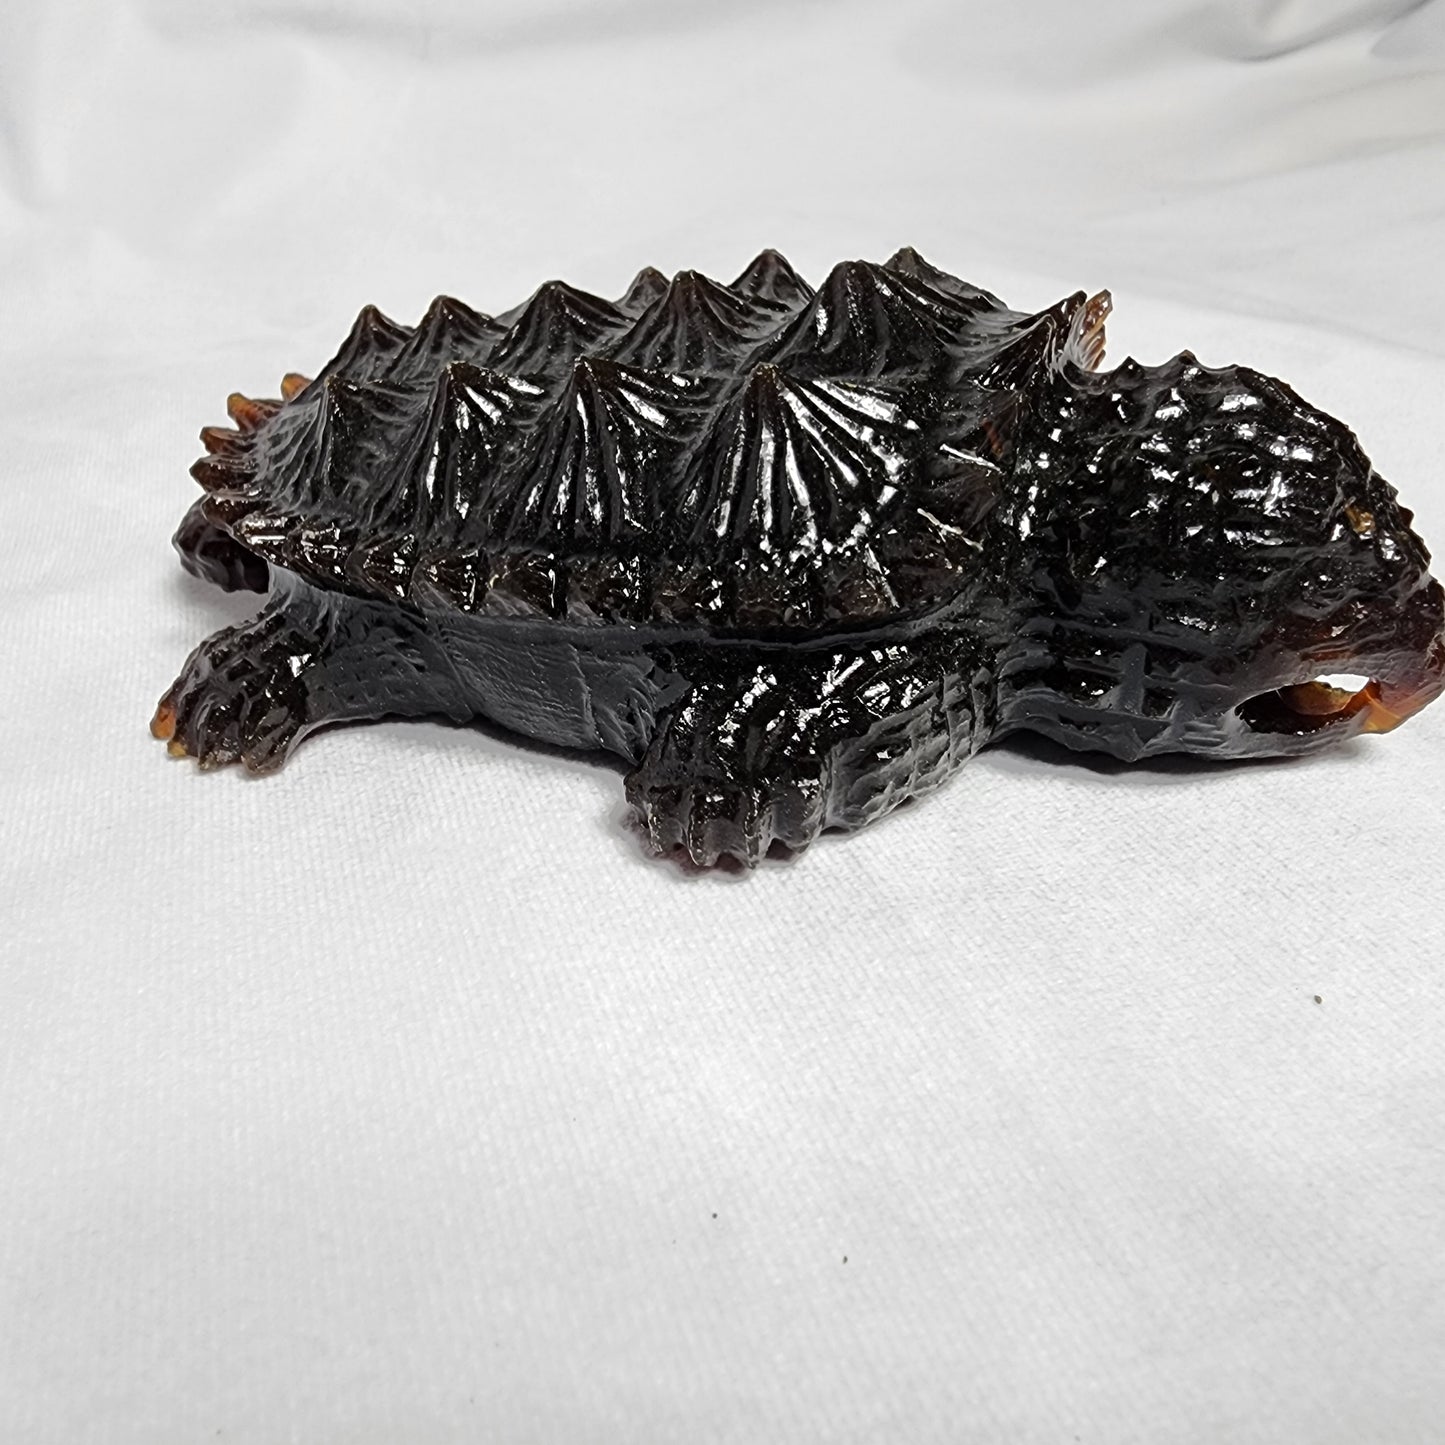 Snazzy Sculpted Snapping Turtle